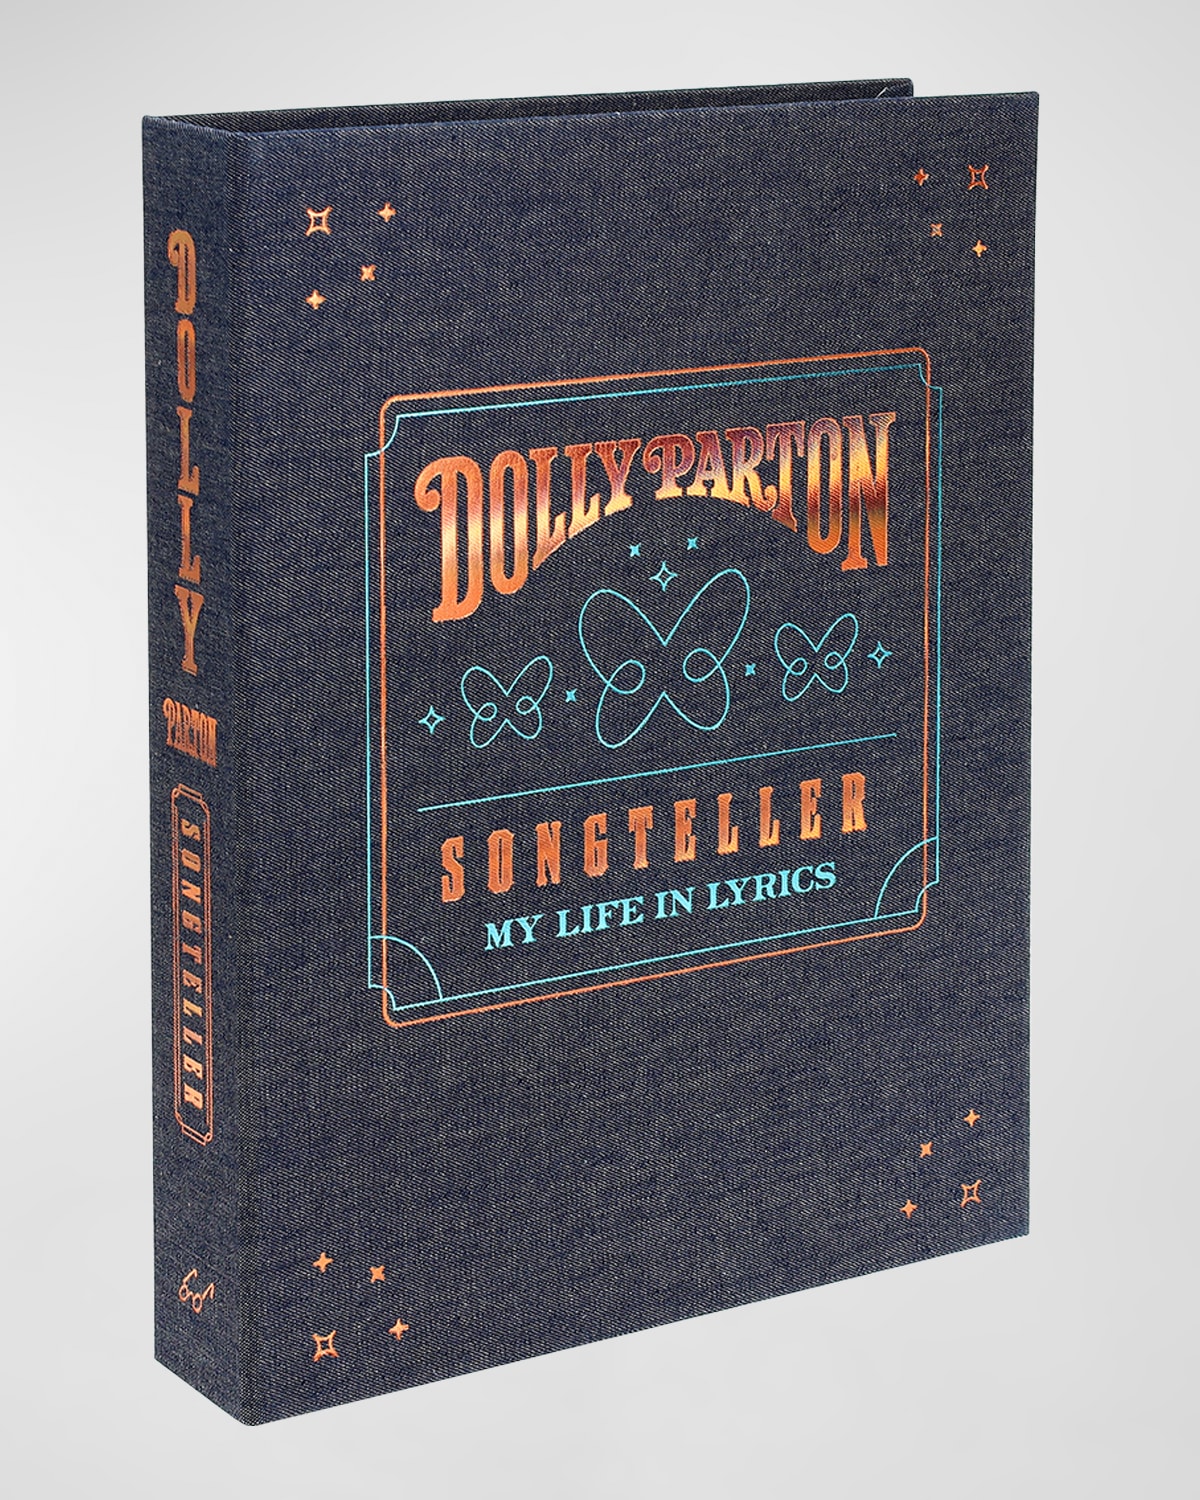 Shop Chronicle Books Dolly Parton, Songteller: My Life In Lyrics Limited Edition Book By Robert K. Oermann & Dolly Parton